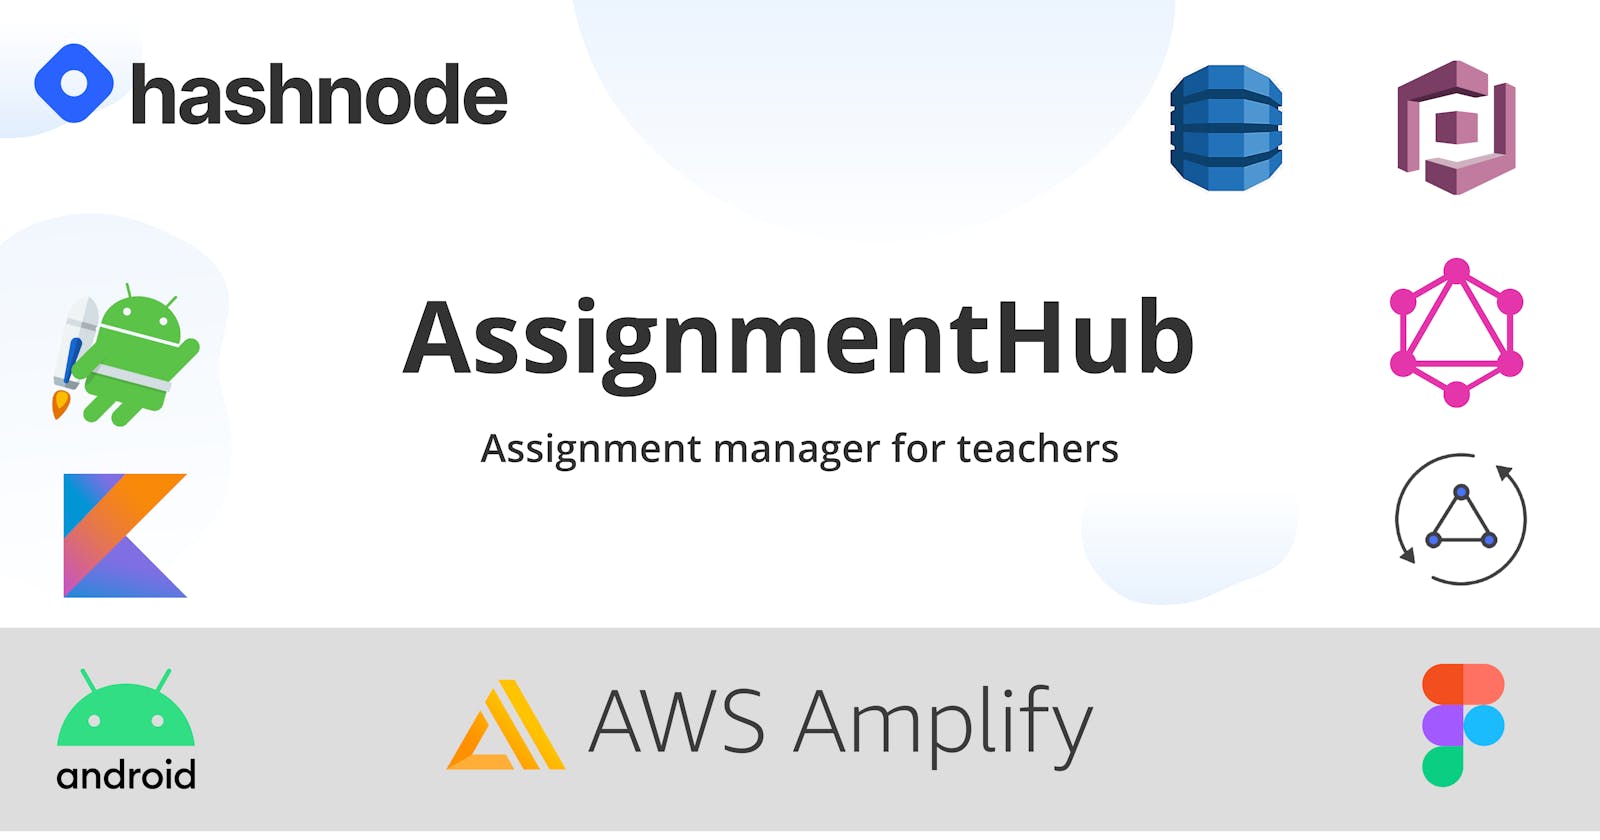 AssignmentHub - An App to manage assignments for university professors